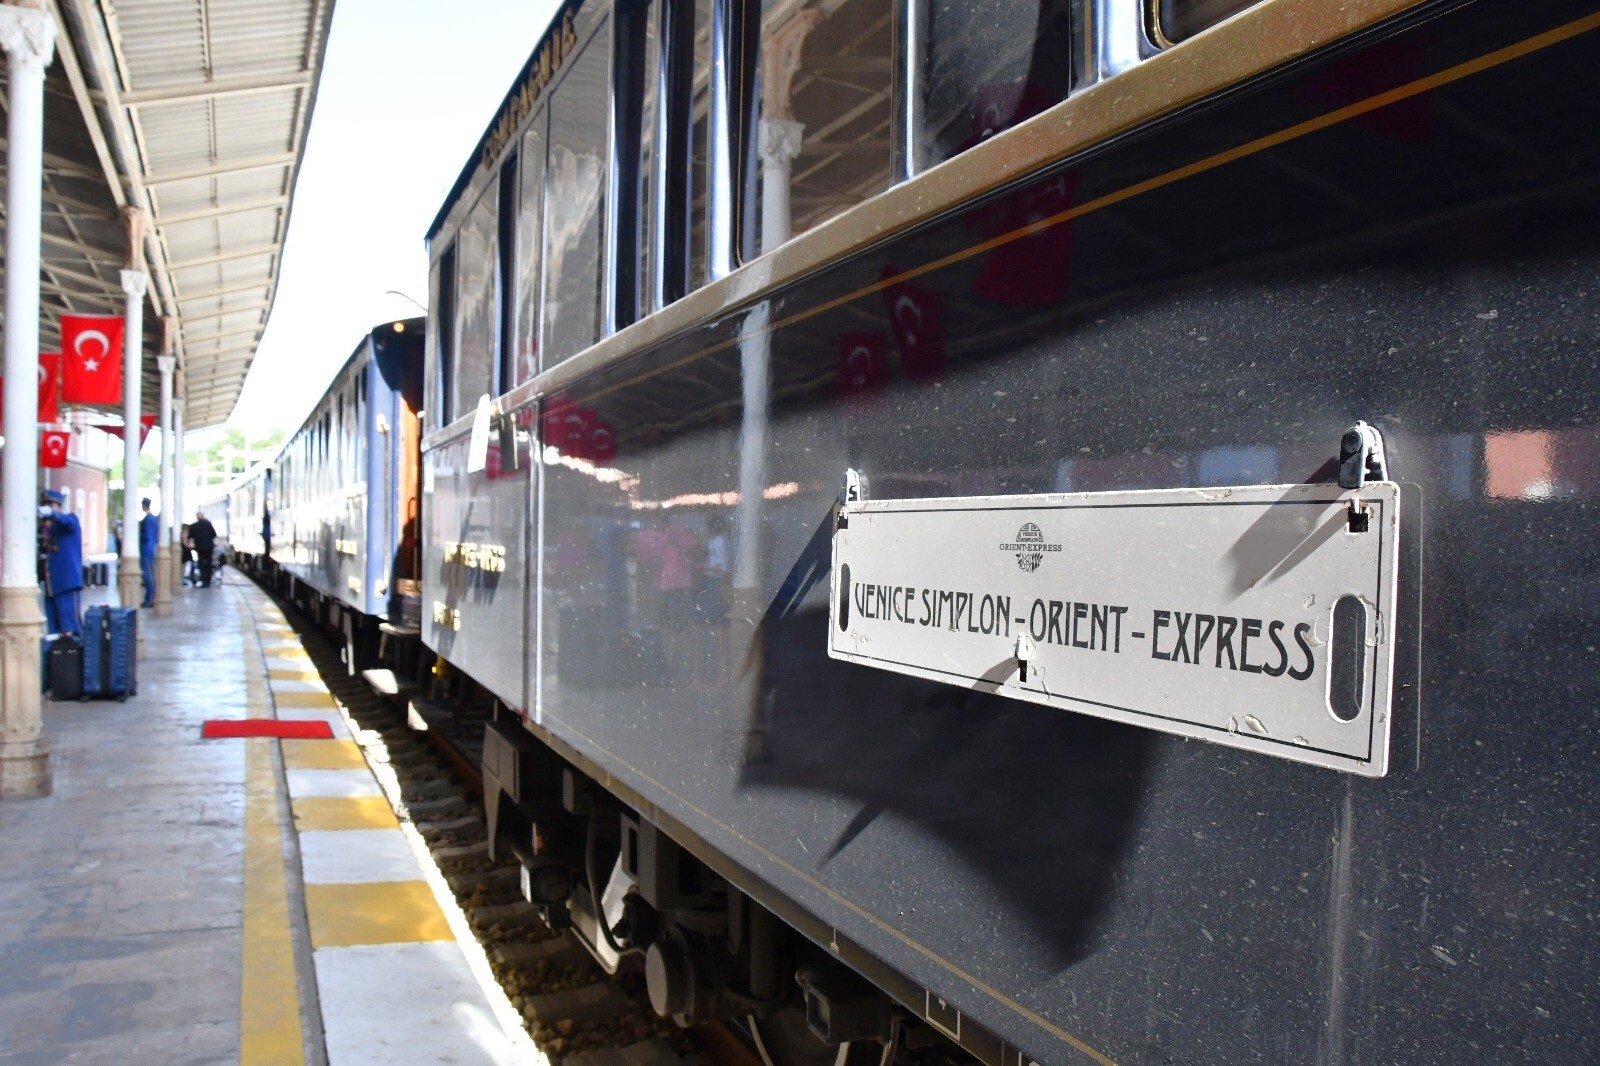 Orient Express returns for enchanting Istanbul escape